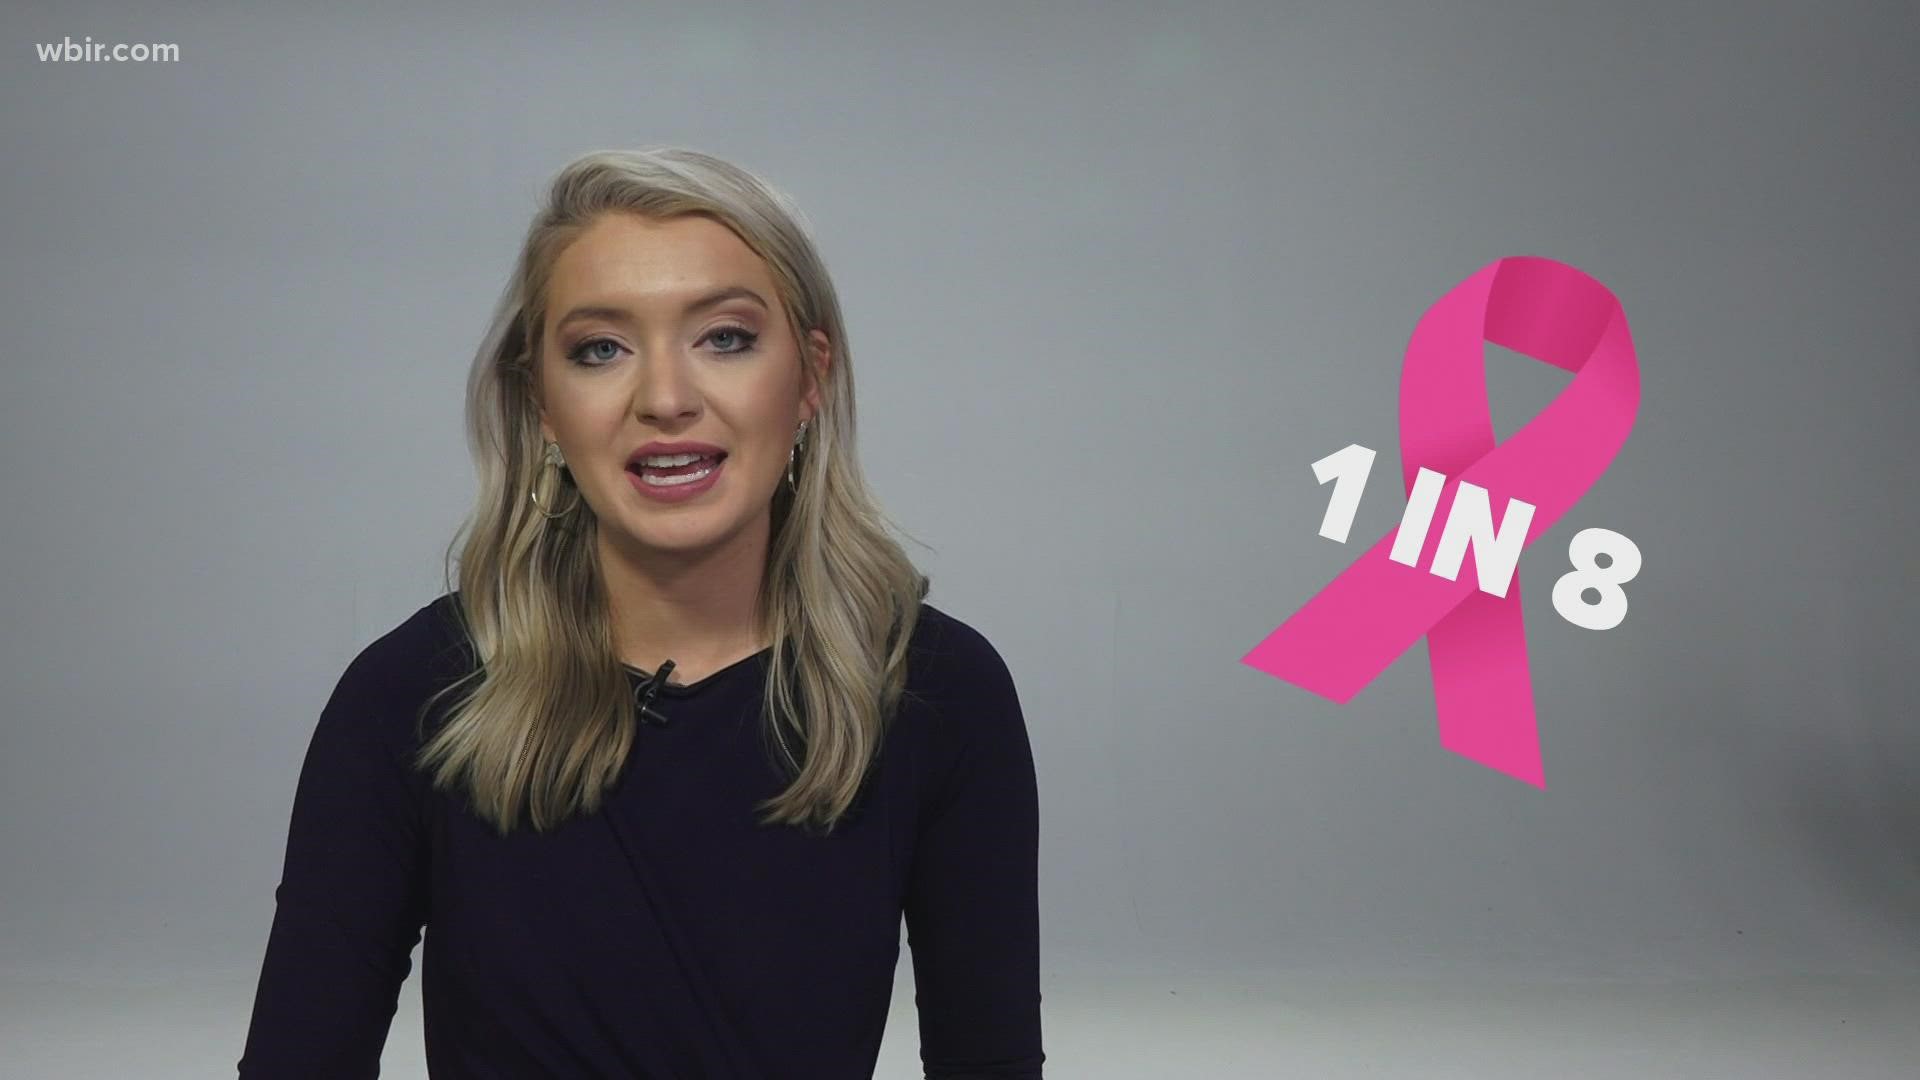 Every tenth of the month, WBIR reminds you and your buddy to do a breast self exam. Here are 10 facts and tips you should know about the disease.